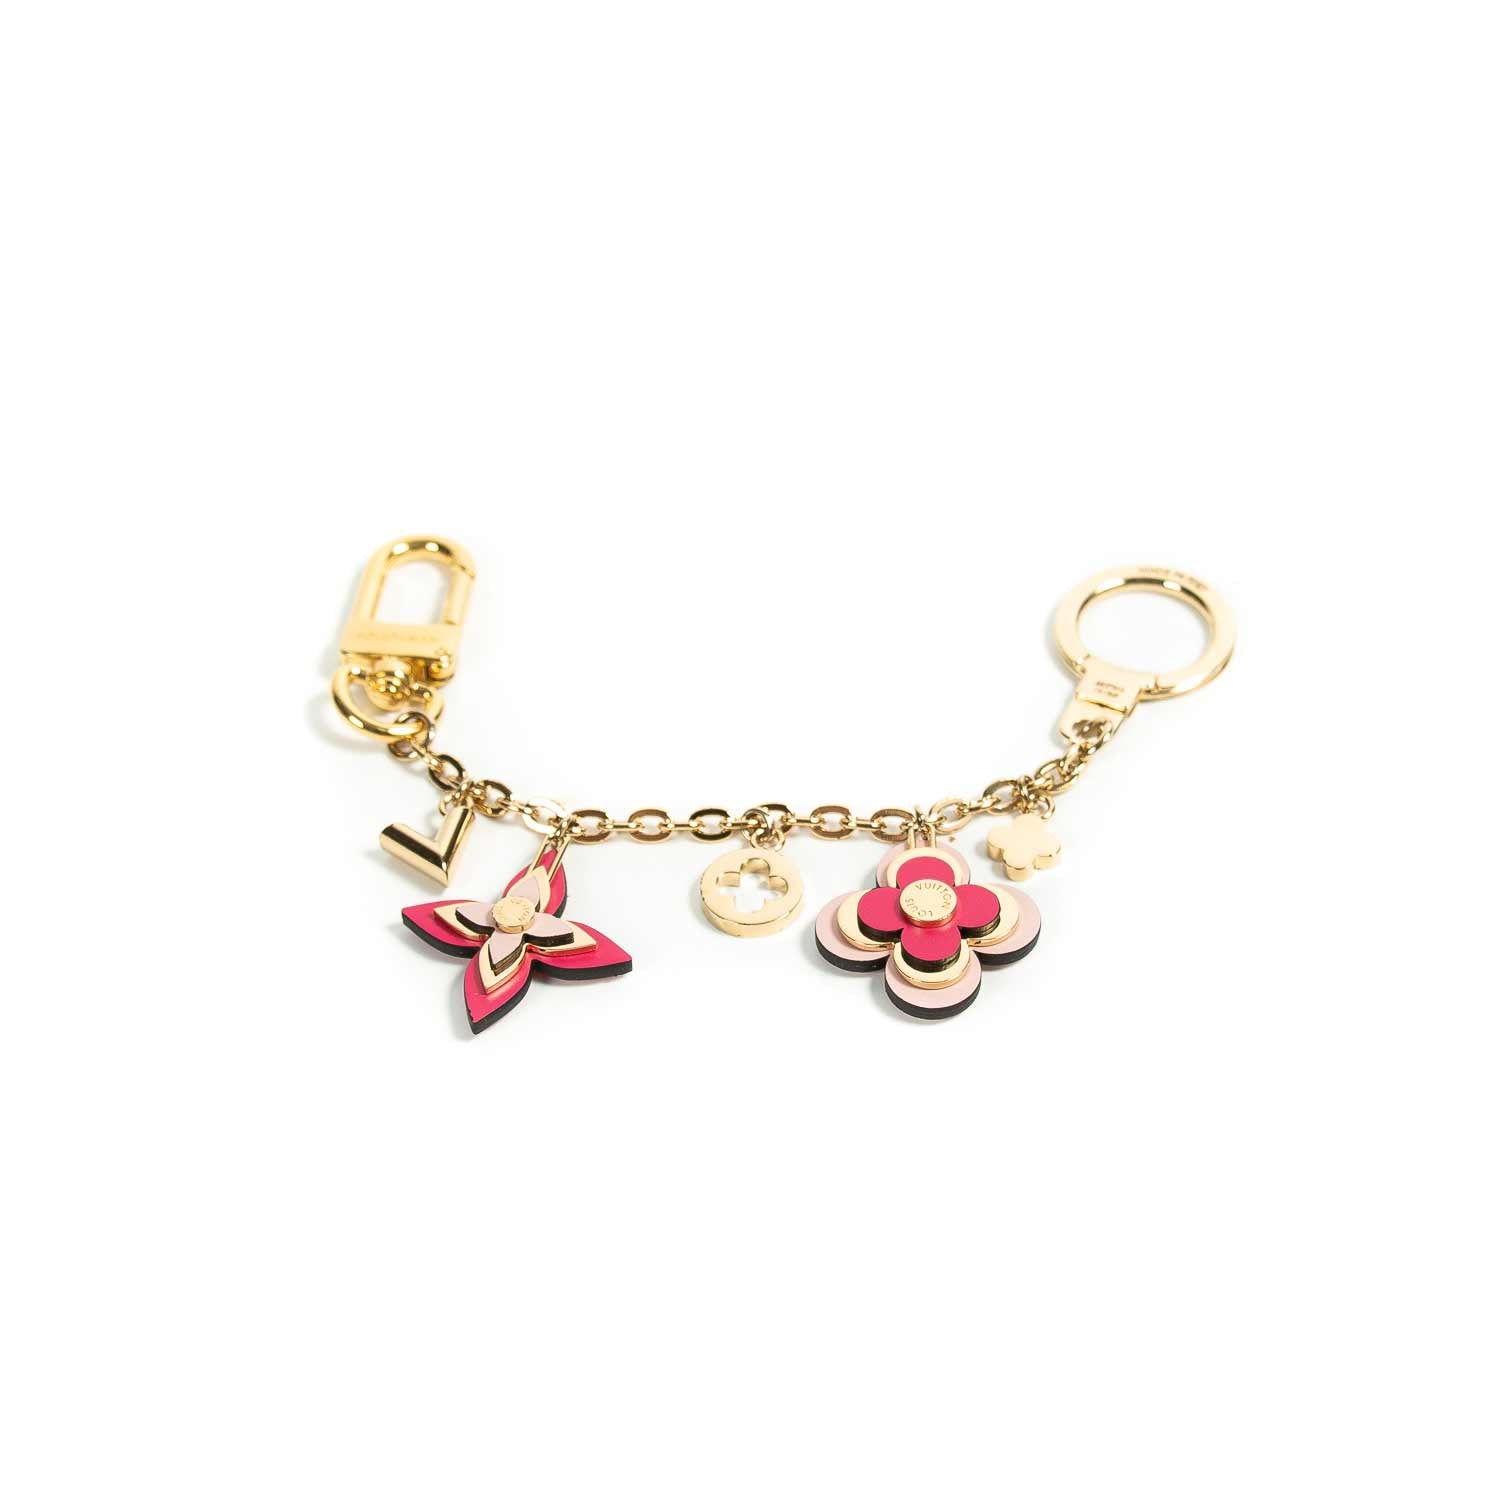 LOUIS VUITTON Blooming Flowers Chain Bag Charm and Key Holder Pink